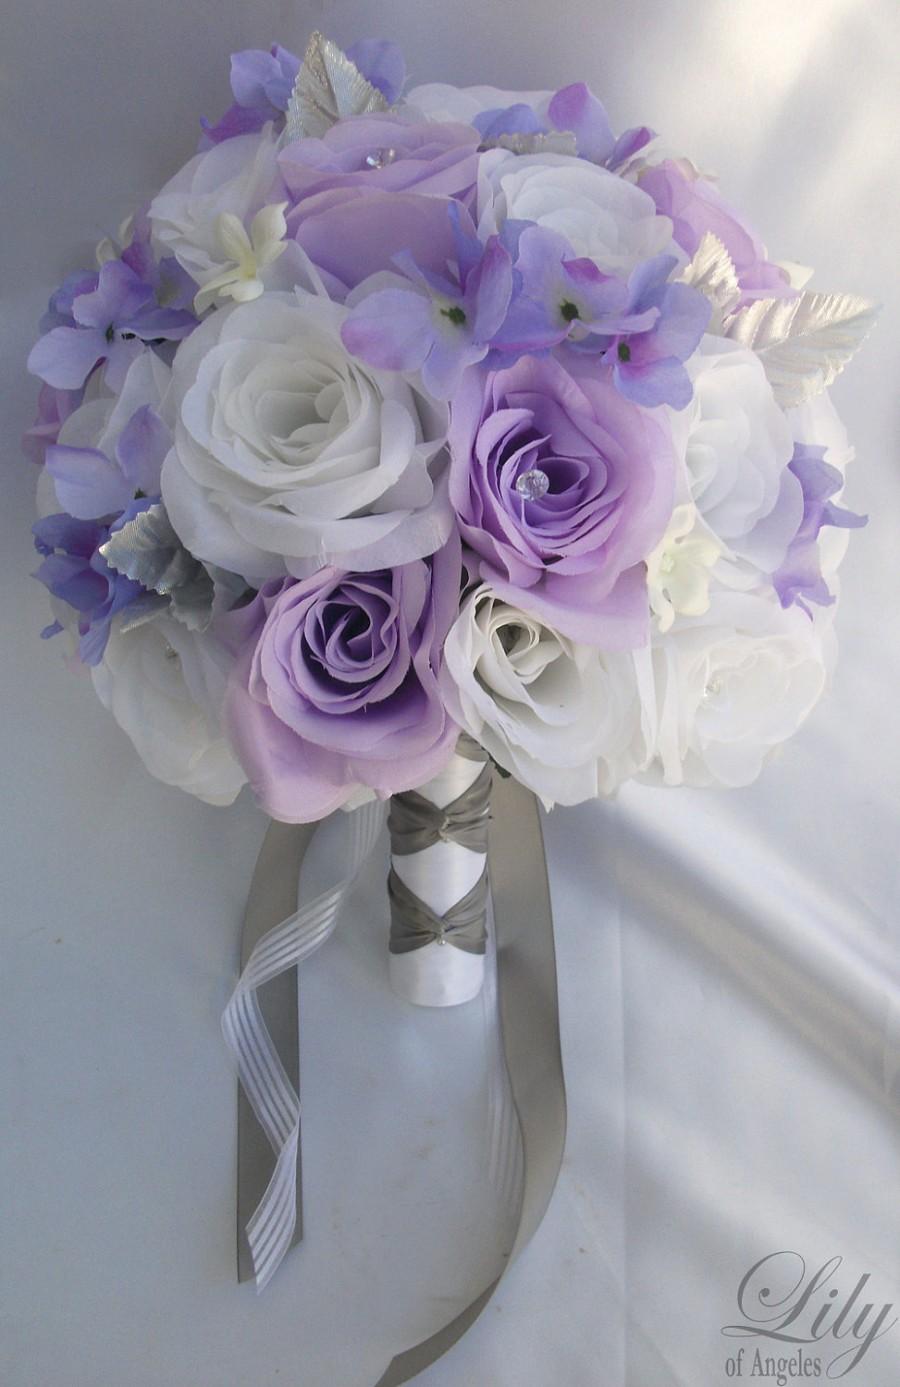 Wedding - 17 Piece Package Wedding Bridal Bride Maid Of Honor Bridesmaid Bouquet Boutonniere Corsage Silk Flower WHITE LAVENDER "Lily Of Angeles"